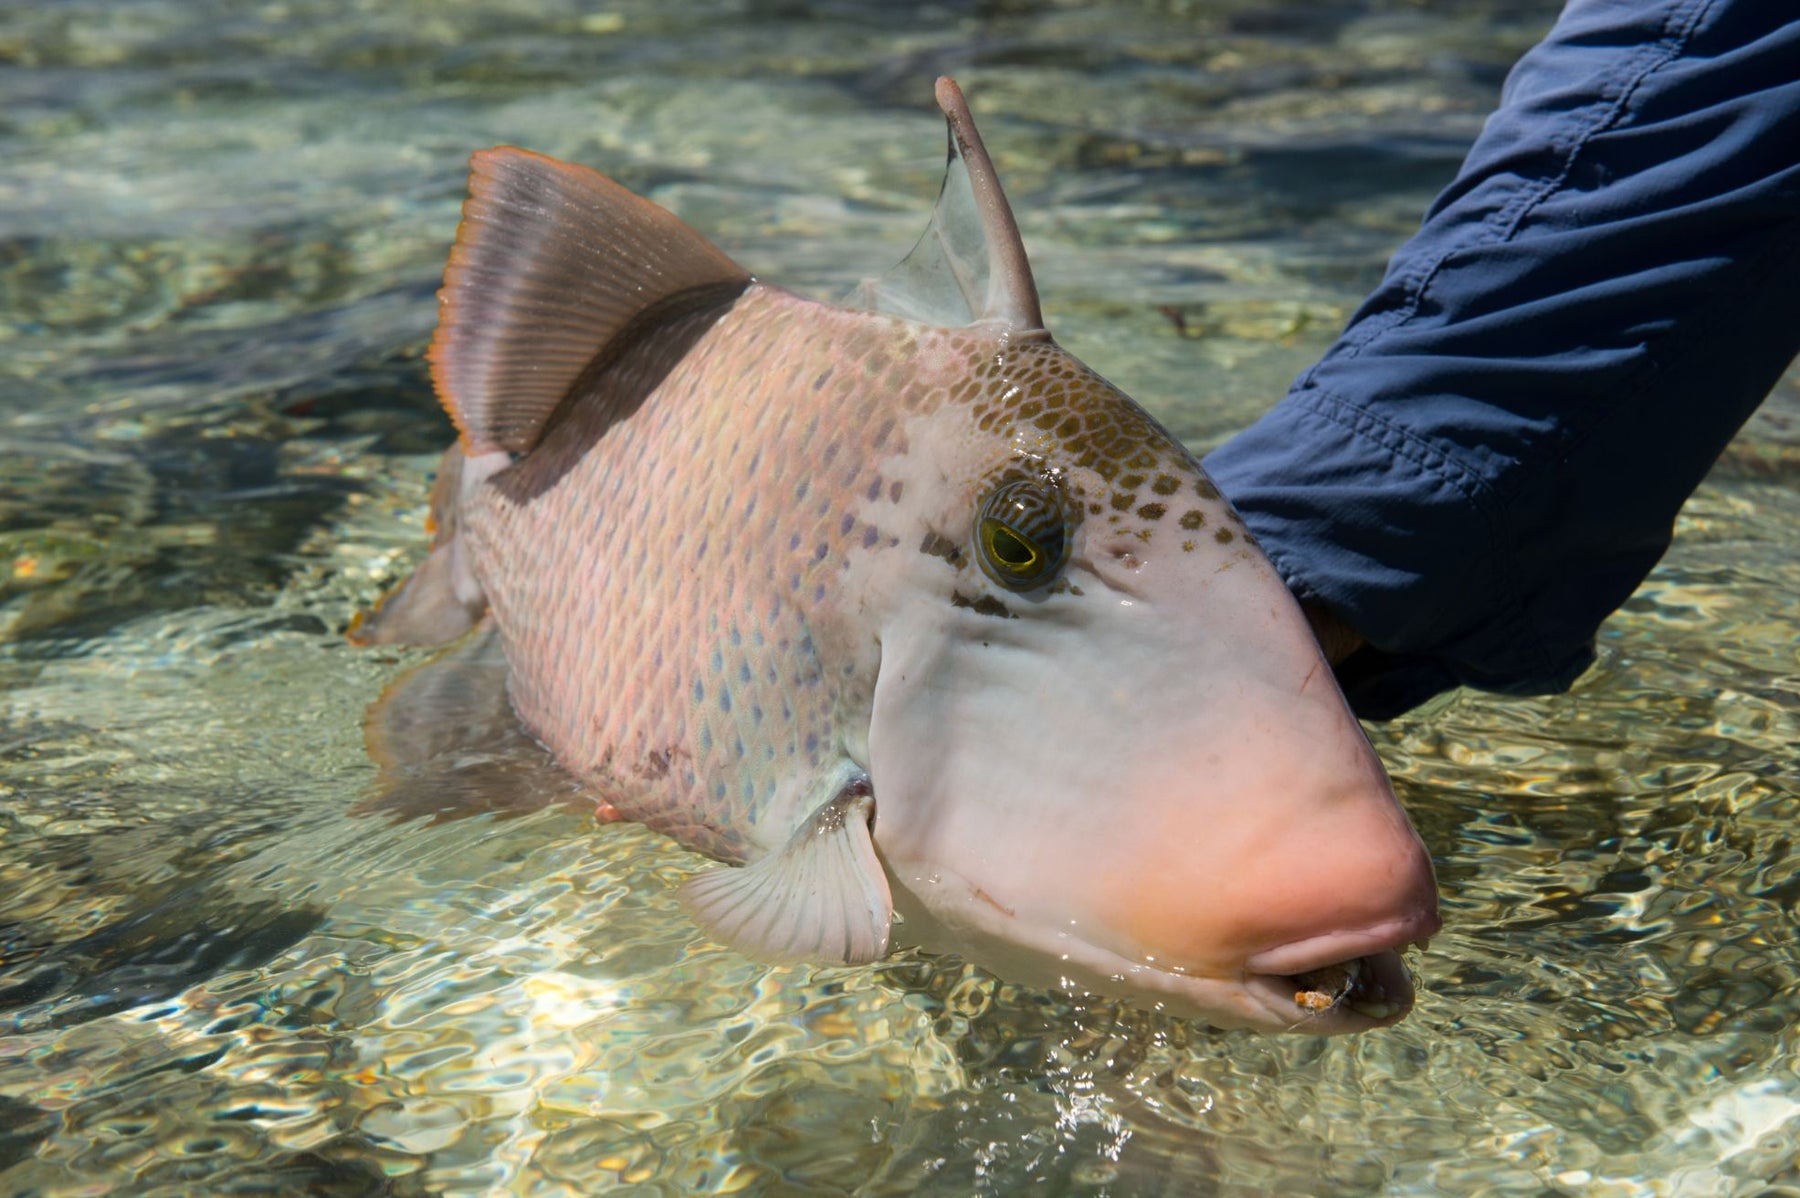 We help identify the saltwater fishing species that you can expect